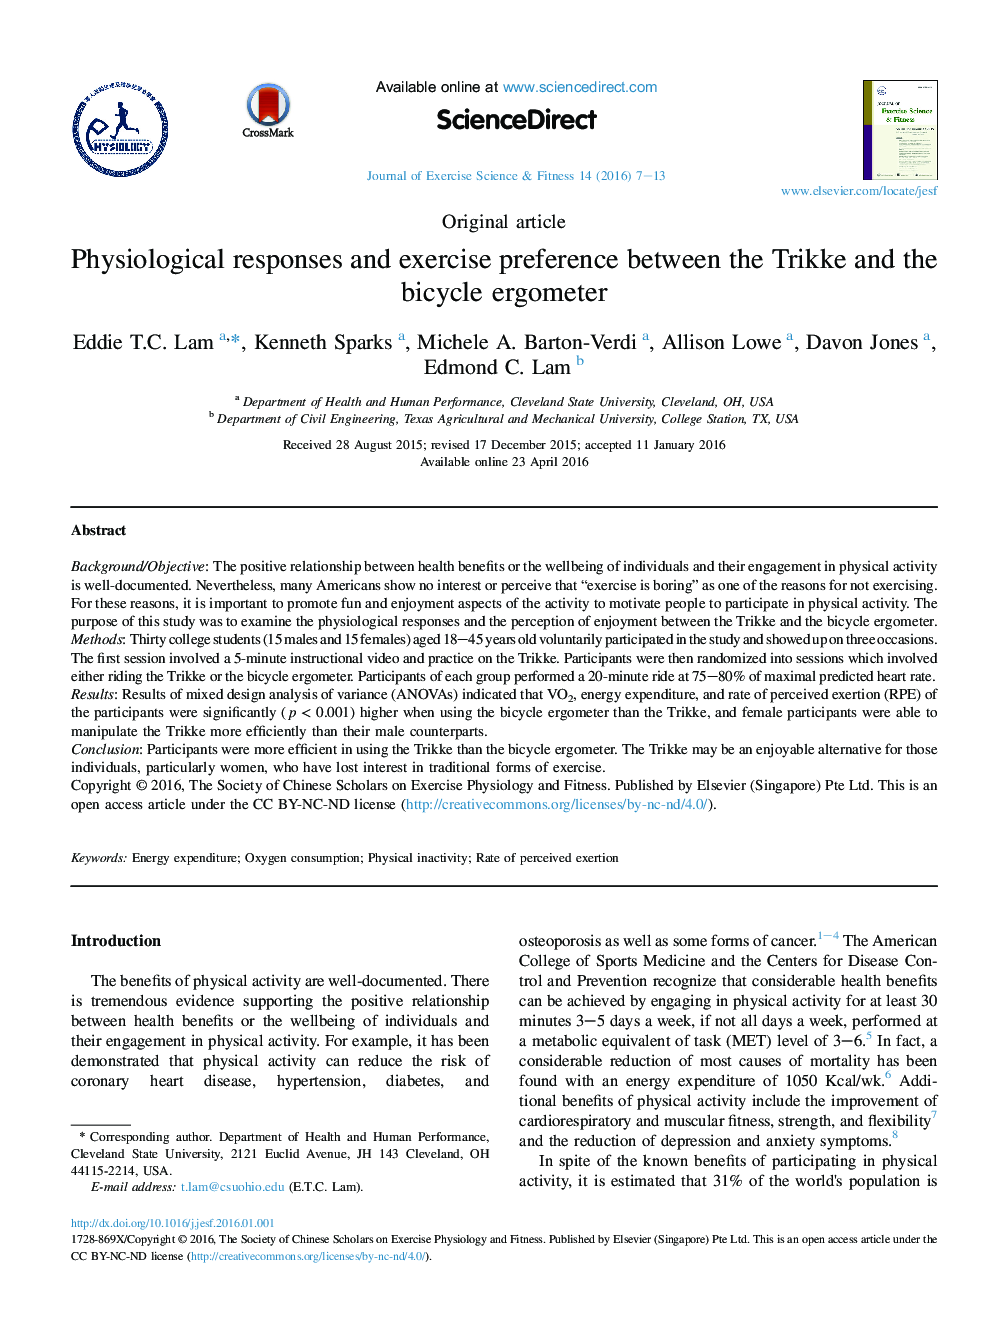 Physiological responses and exercise preference between the Trikke and the bicycle ergometer